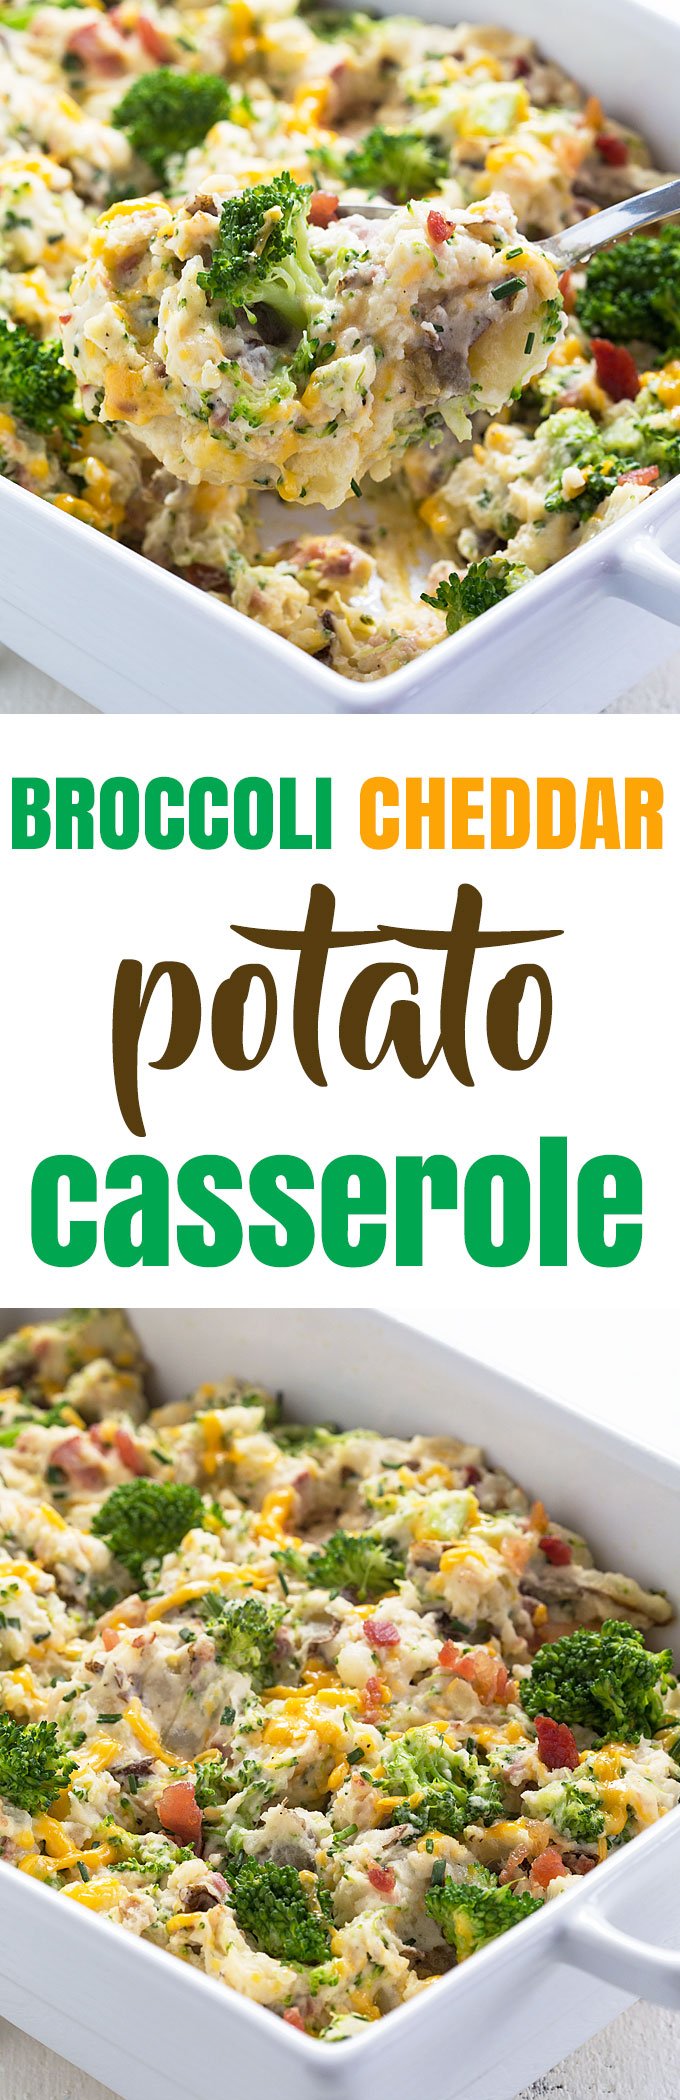 A two image vertical collage of broccoli cheddar potato casserole with overlay text.